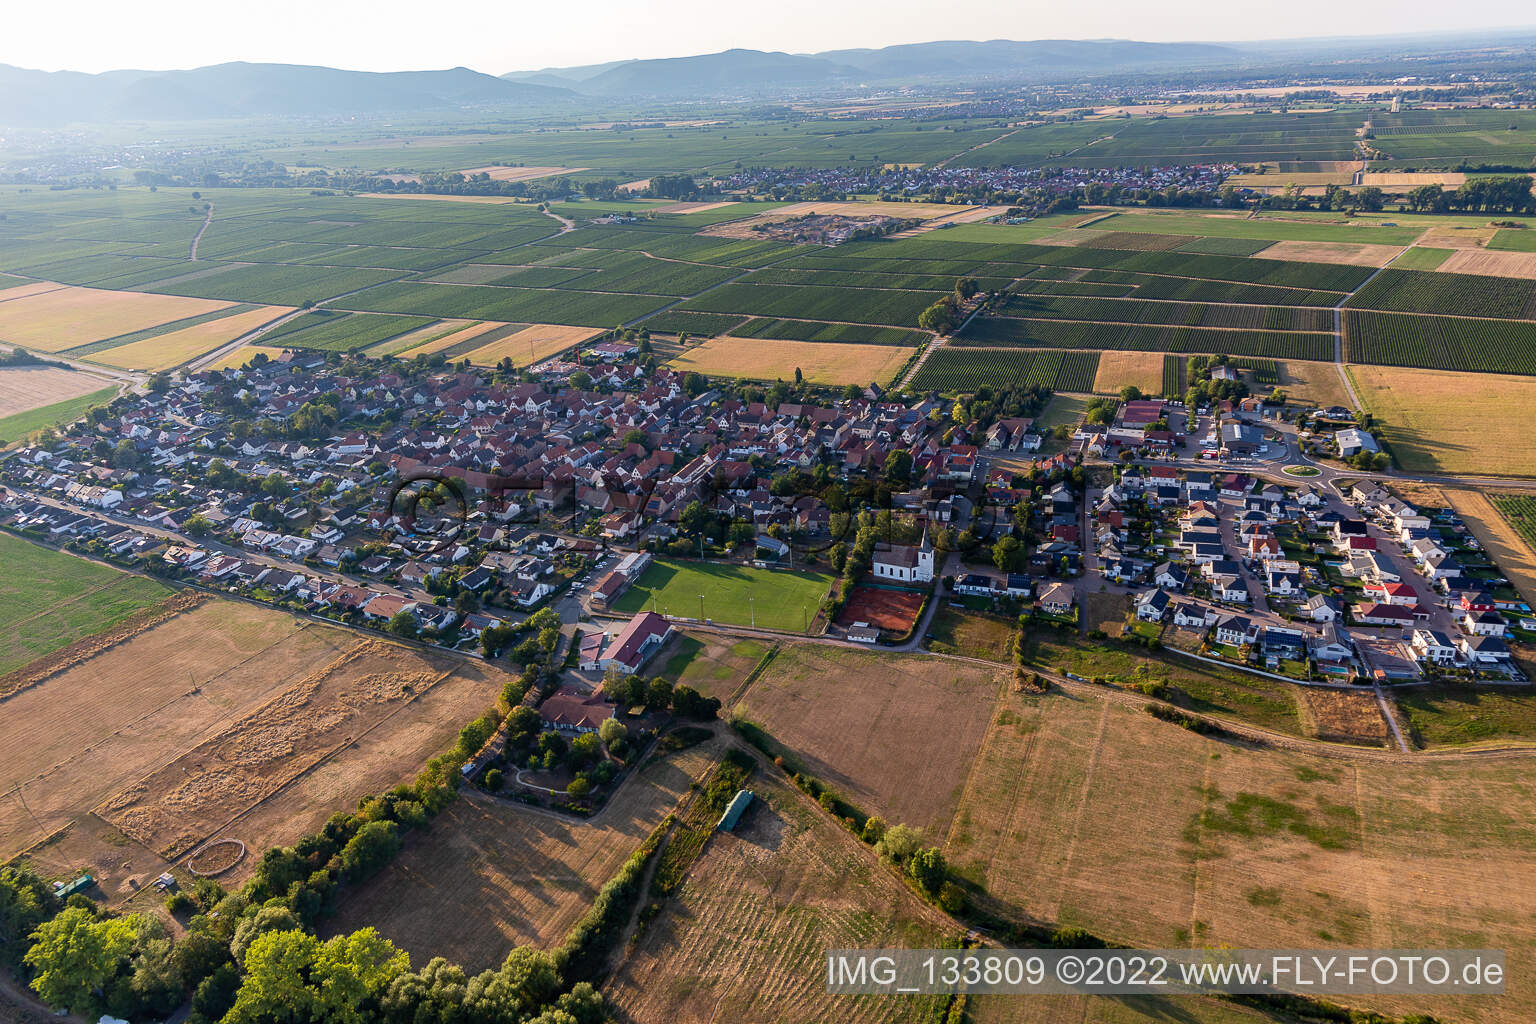 Altdorf in the state Rhineland-Palatinate, Germany from a drone